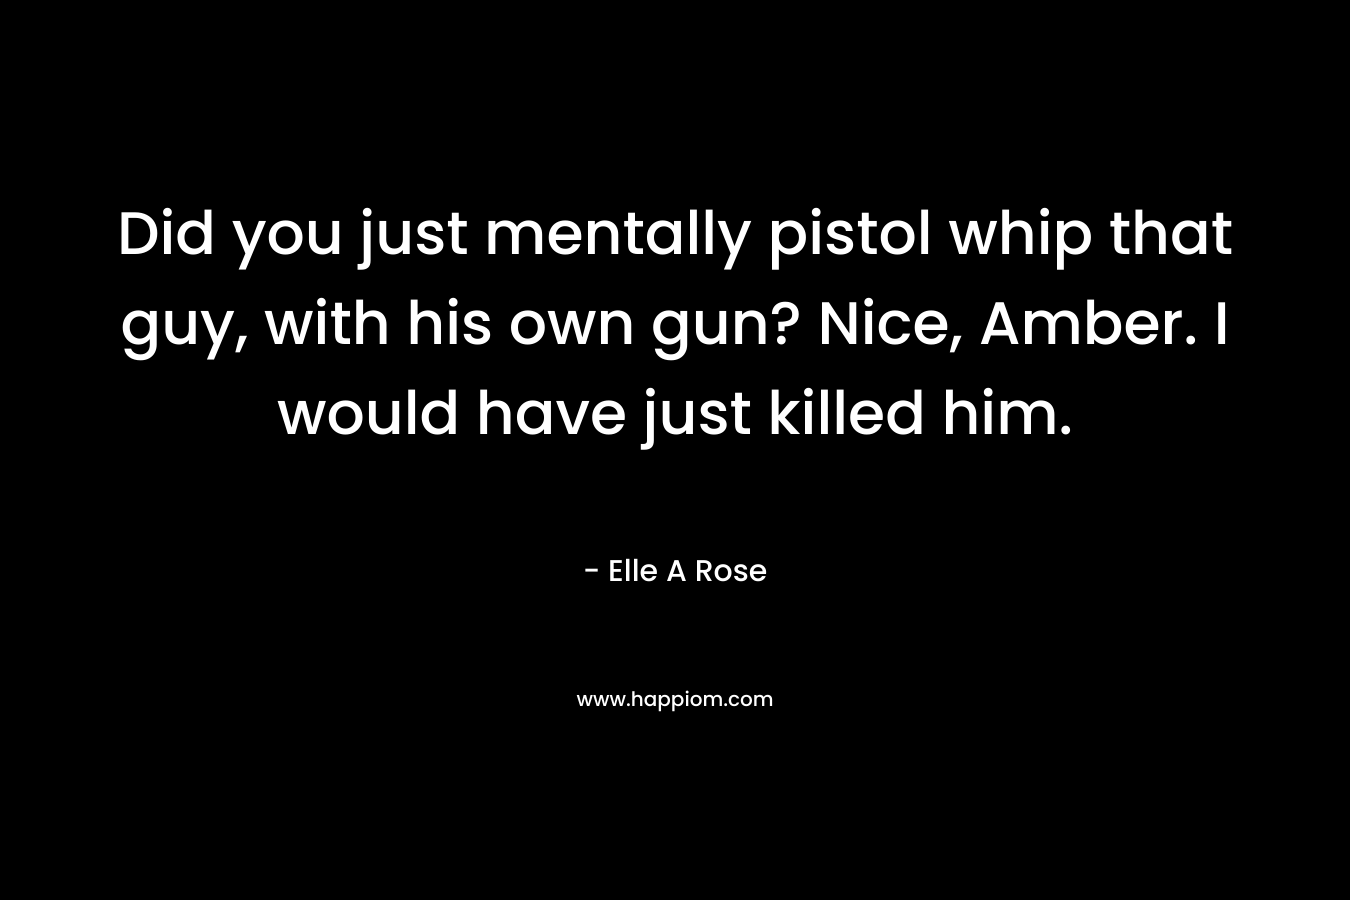 Did you just mentally pistol whip that guy, with his own gun? Nice, Amber. I would have just killed him. – Elle A Rose